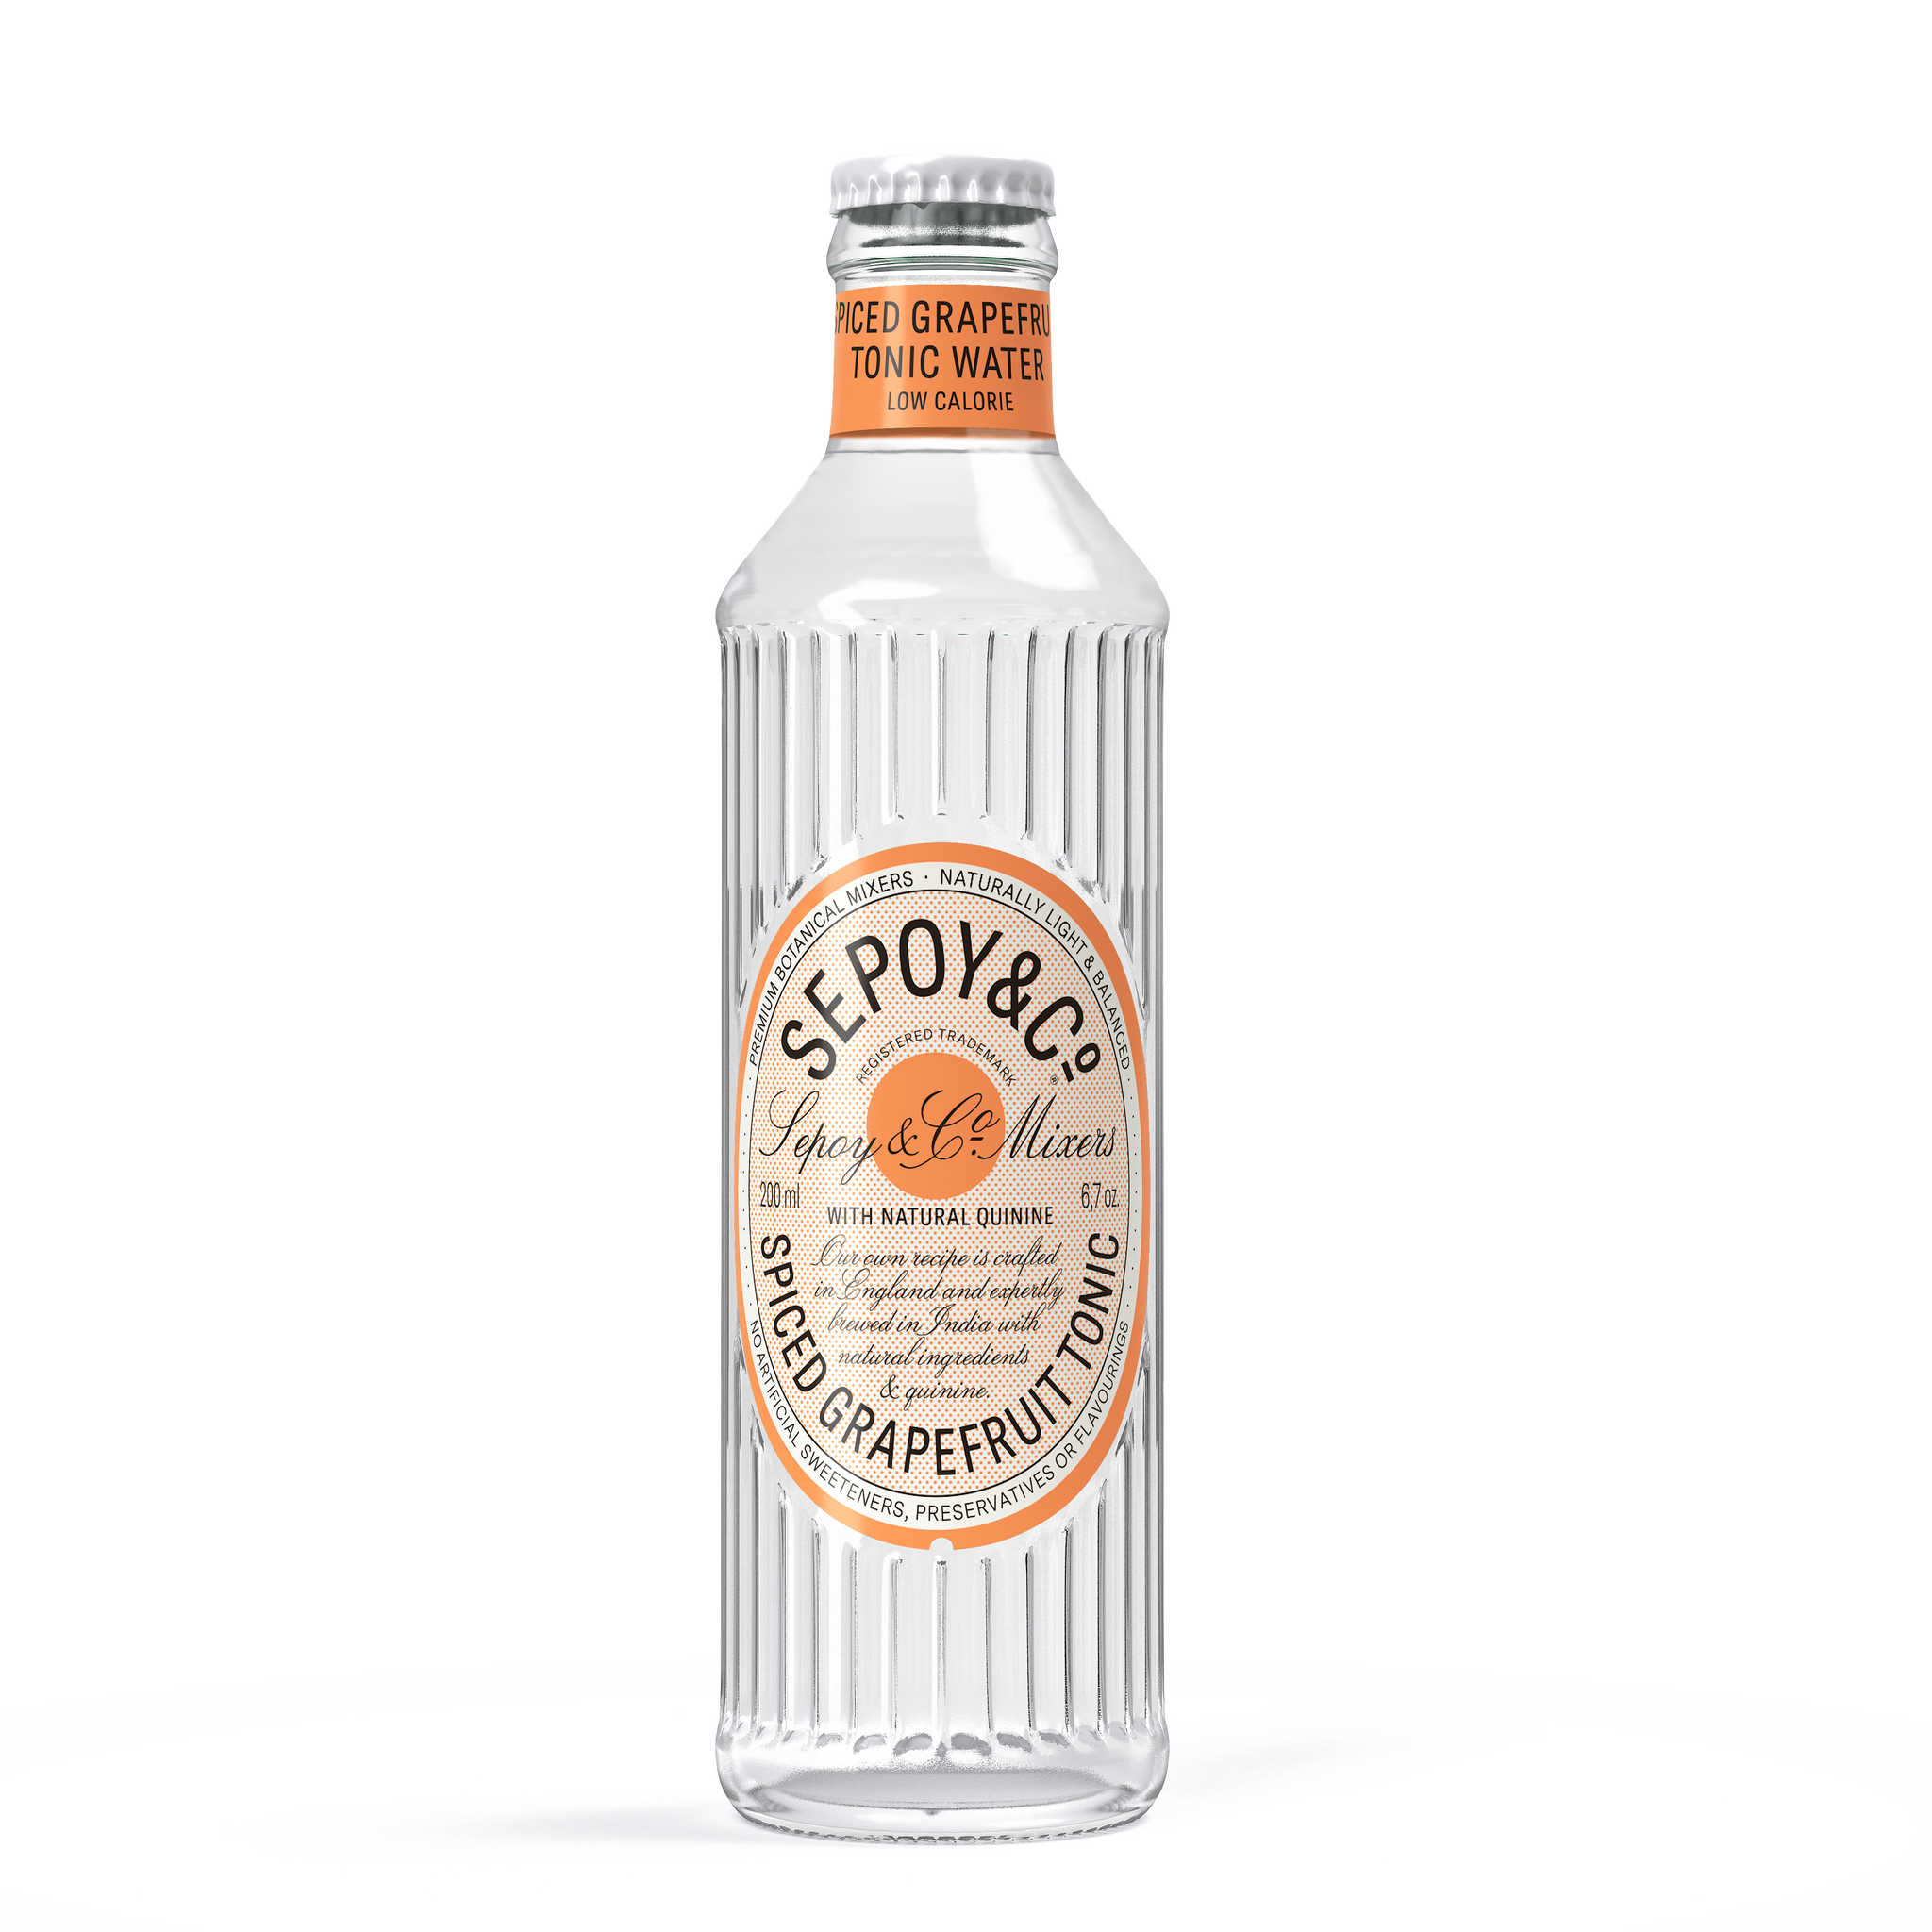 Spiced Grapefruit Tonic Water